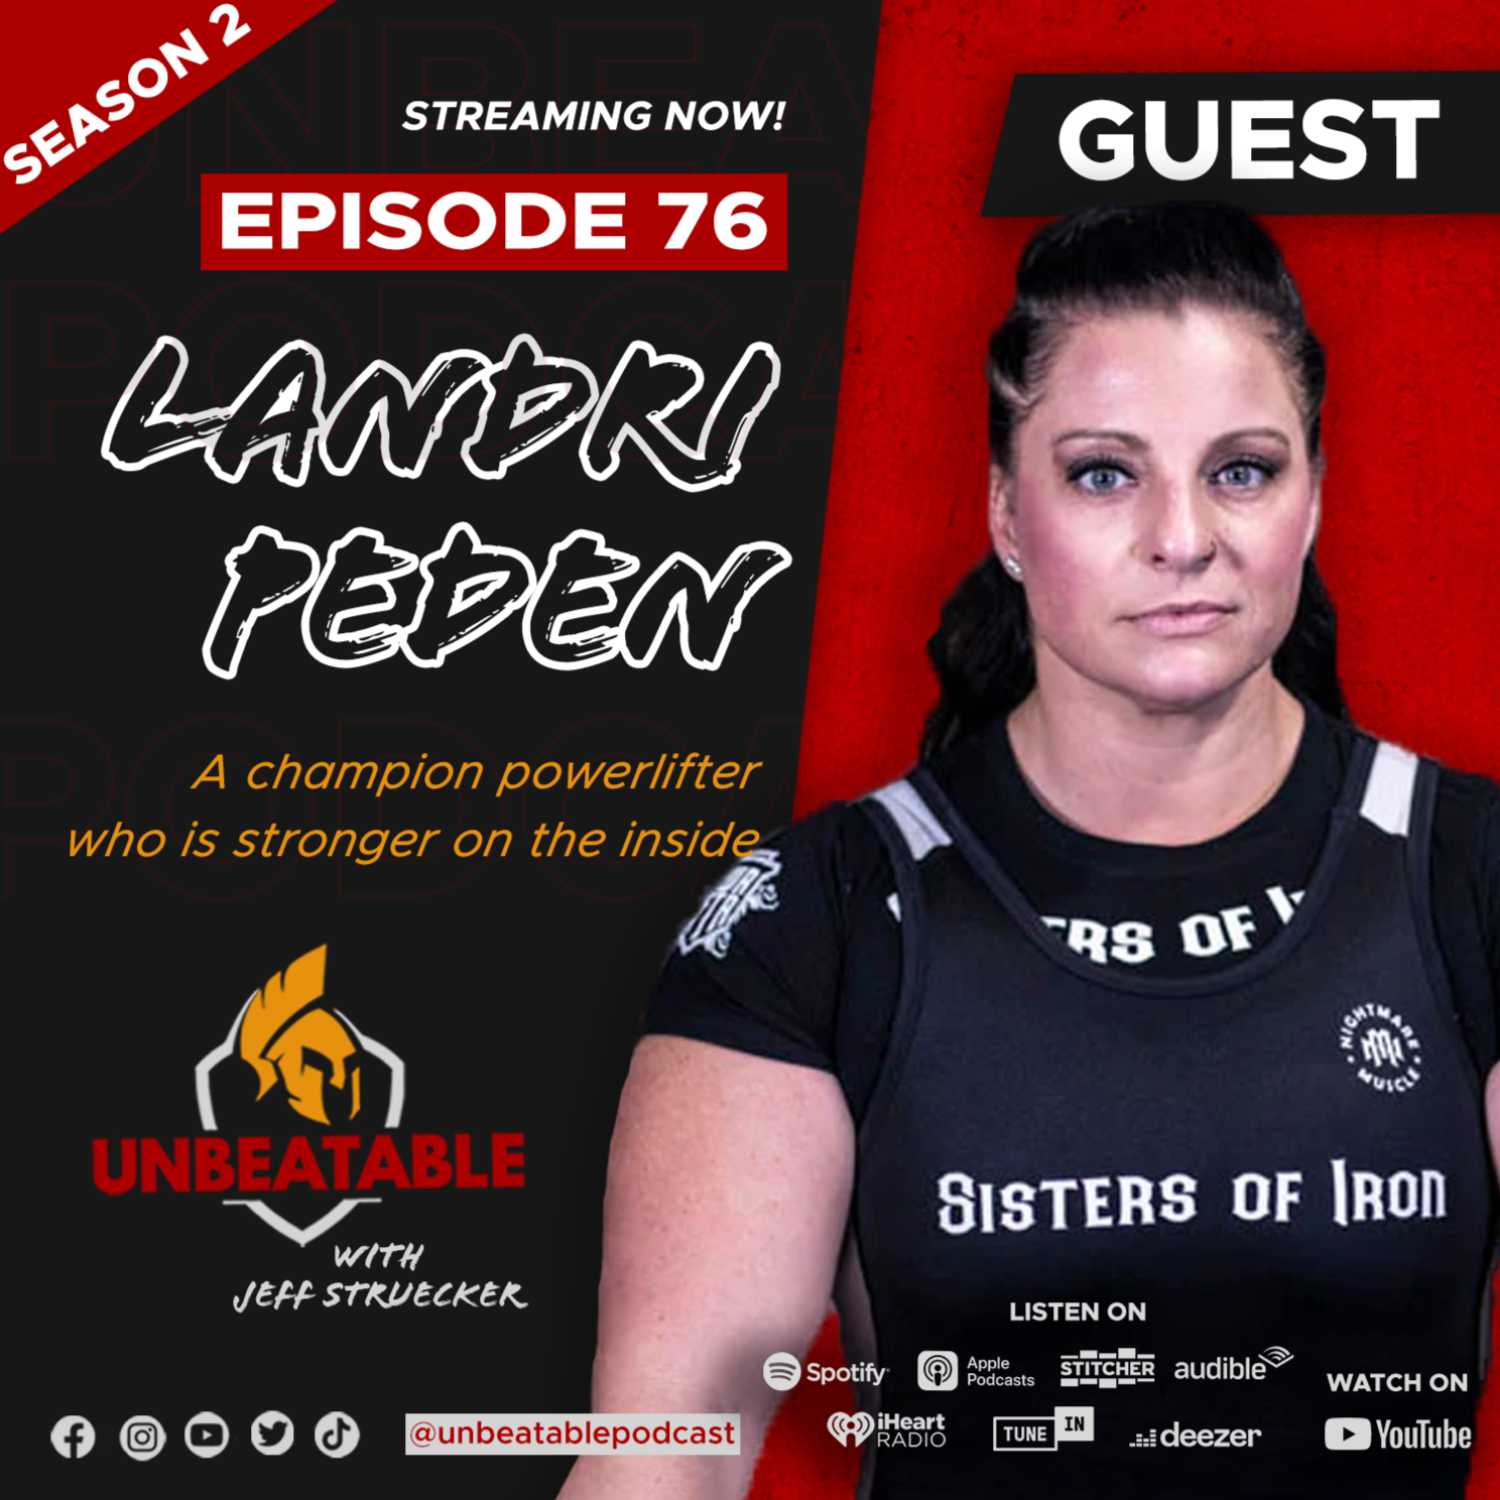 Ep. 76 Landri Peden: A champion powerlifter who is stronger on the inside.